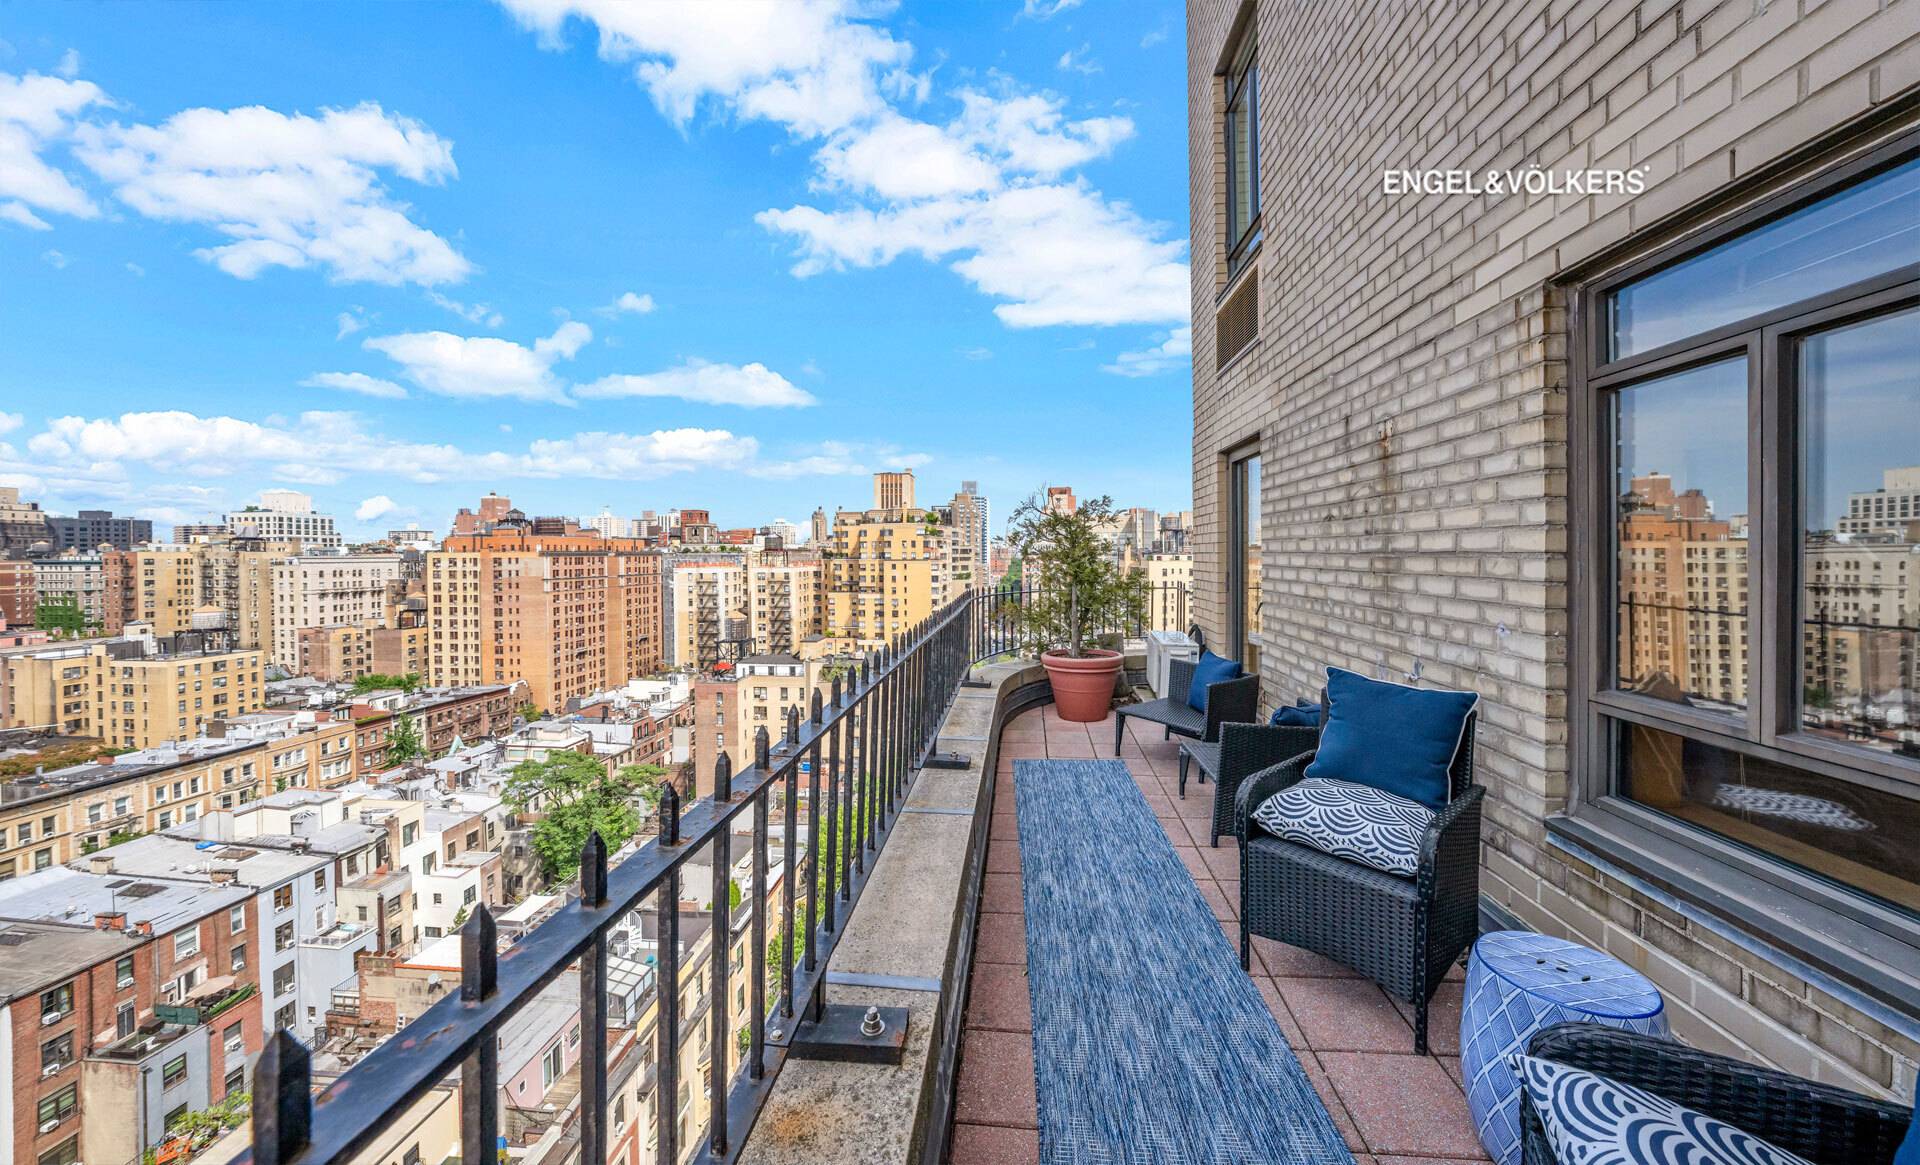 BRIGHT amp ; AIRY SPACIOUS 4BR TWO TERRACES CITY amp ; RIVER VIEWS HI FLOOR WBFP TOP EMERY ROTH UWS BUILDING BRING YOUR ARCHITECT TO CREATE YOUR IDEAL HOME An ...